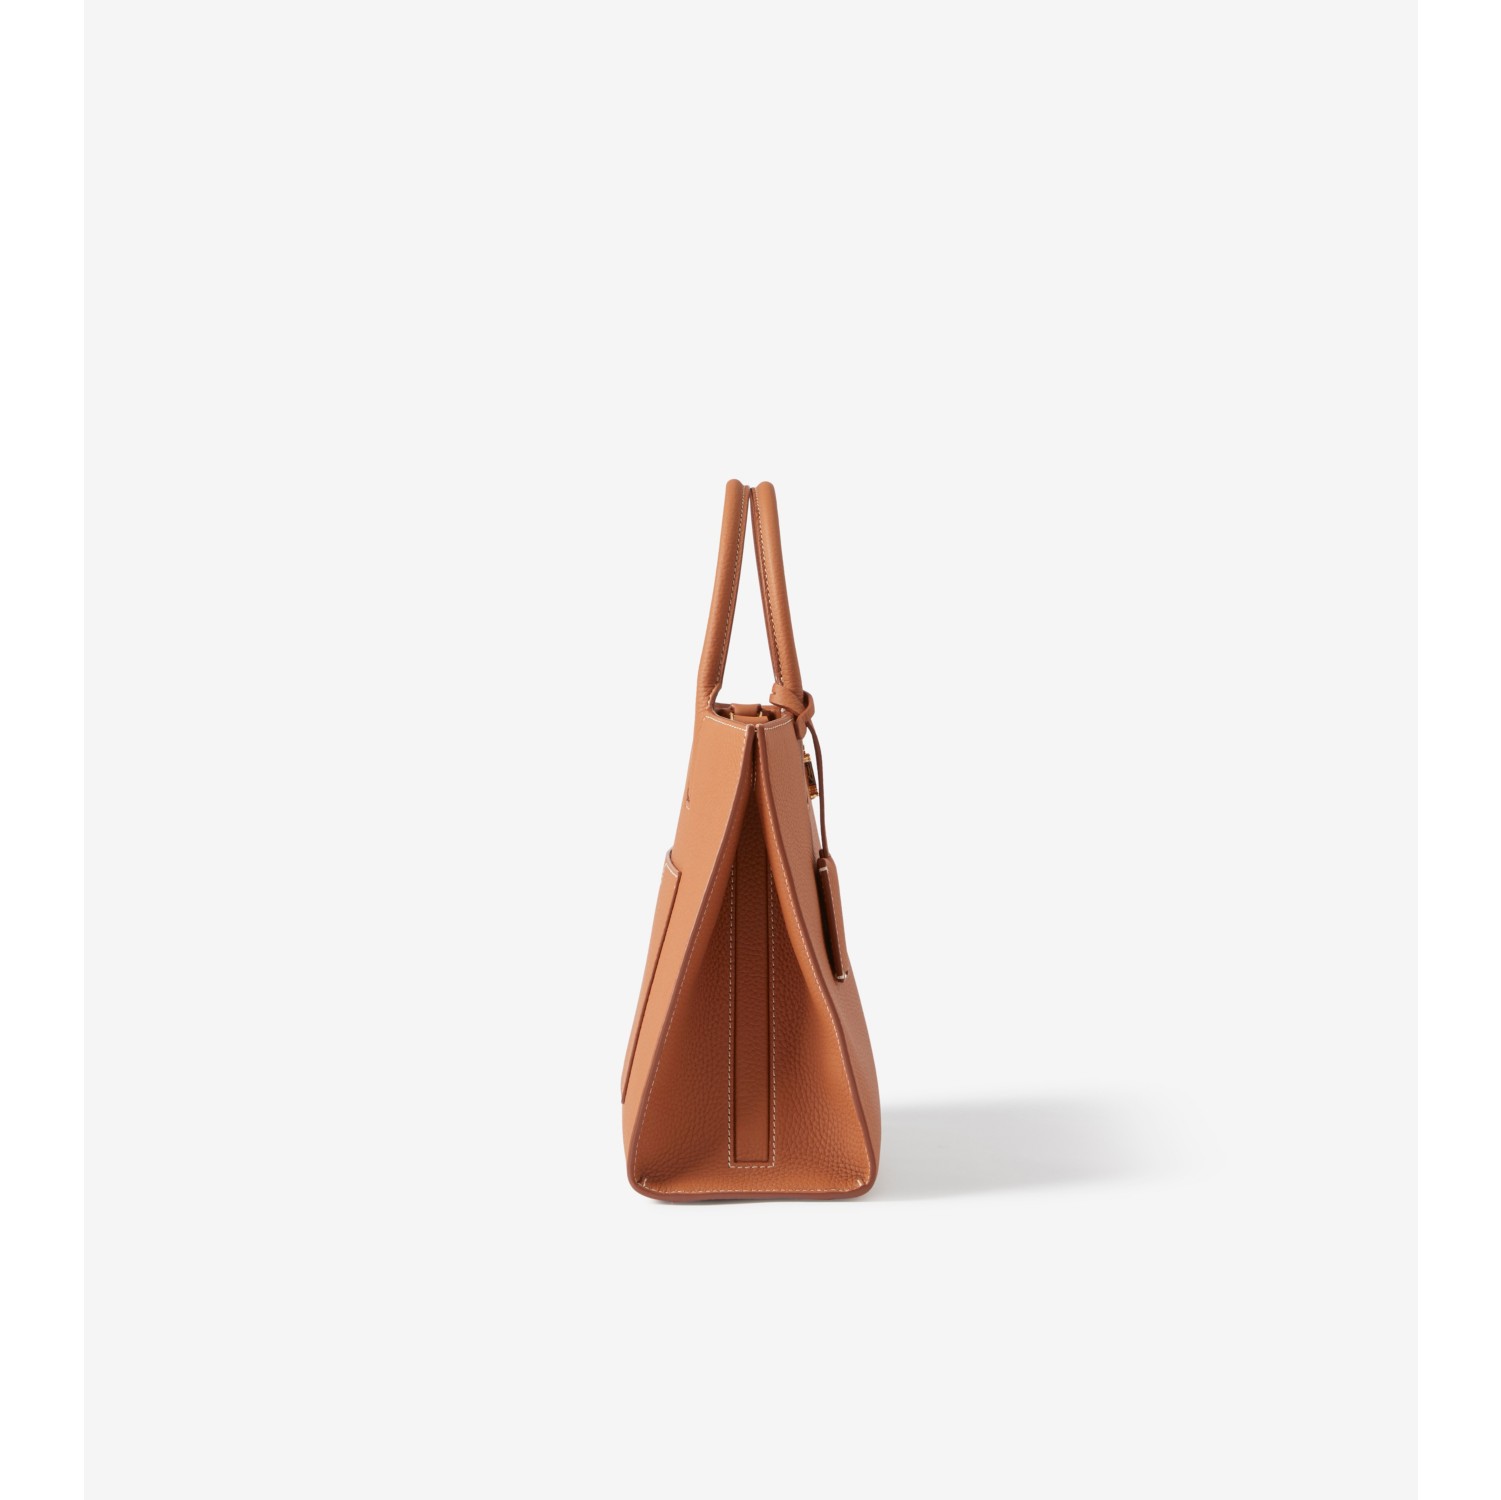 Small Frances Bag in Warm Russet Brown - Women